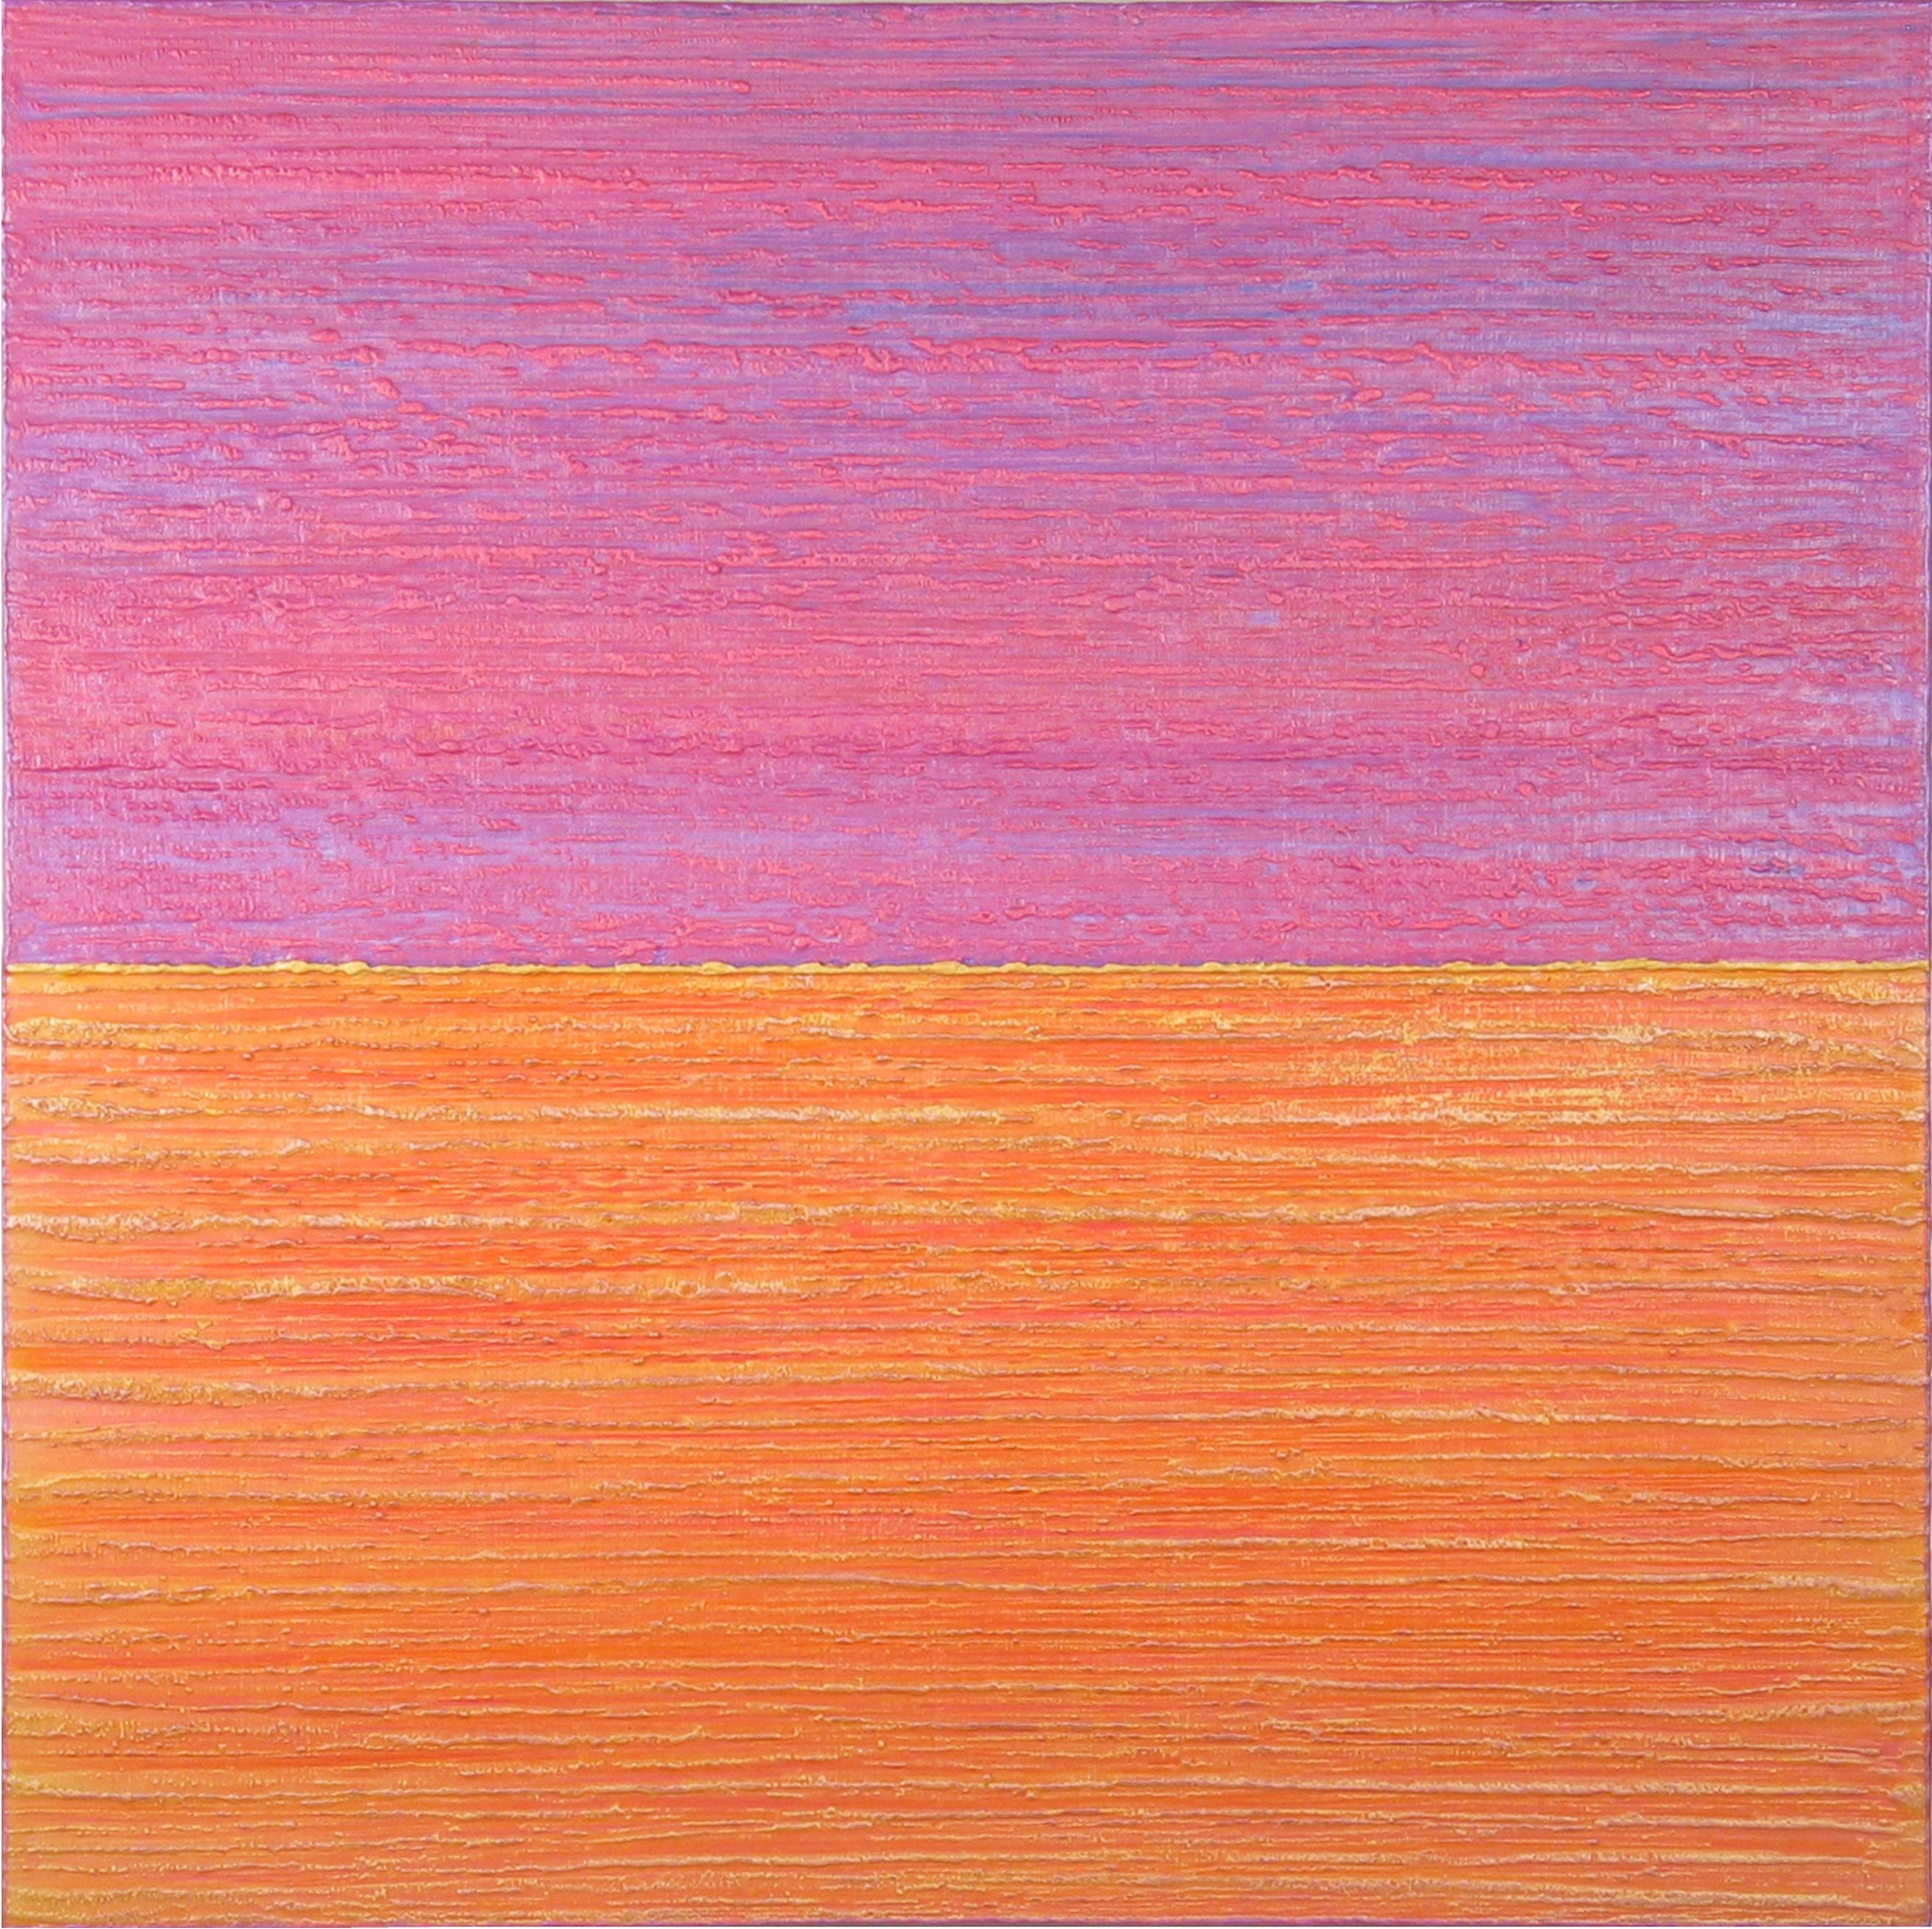 Joanne Mattera Abstract Painting - Silk Road 441, Orange, Gold, Purple, Pink Square Color Field Encaustic Painting